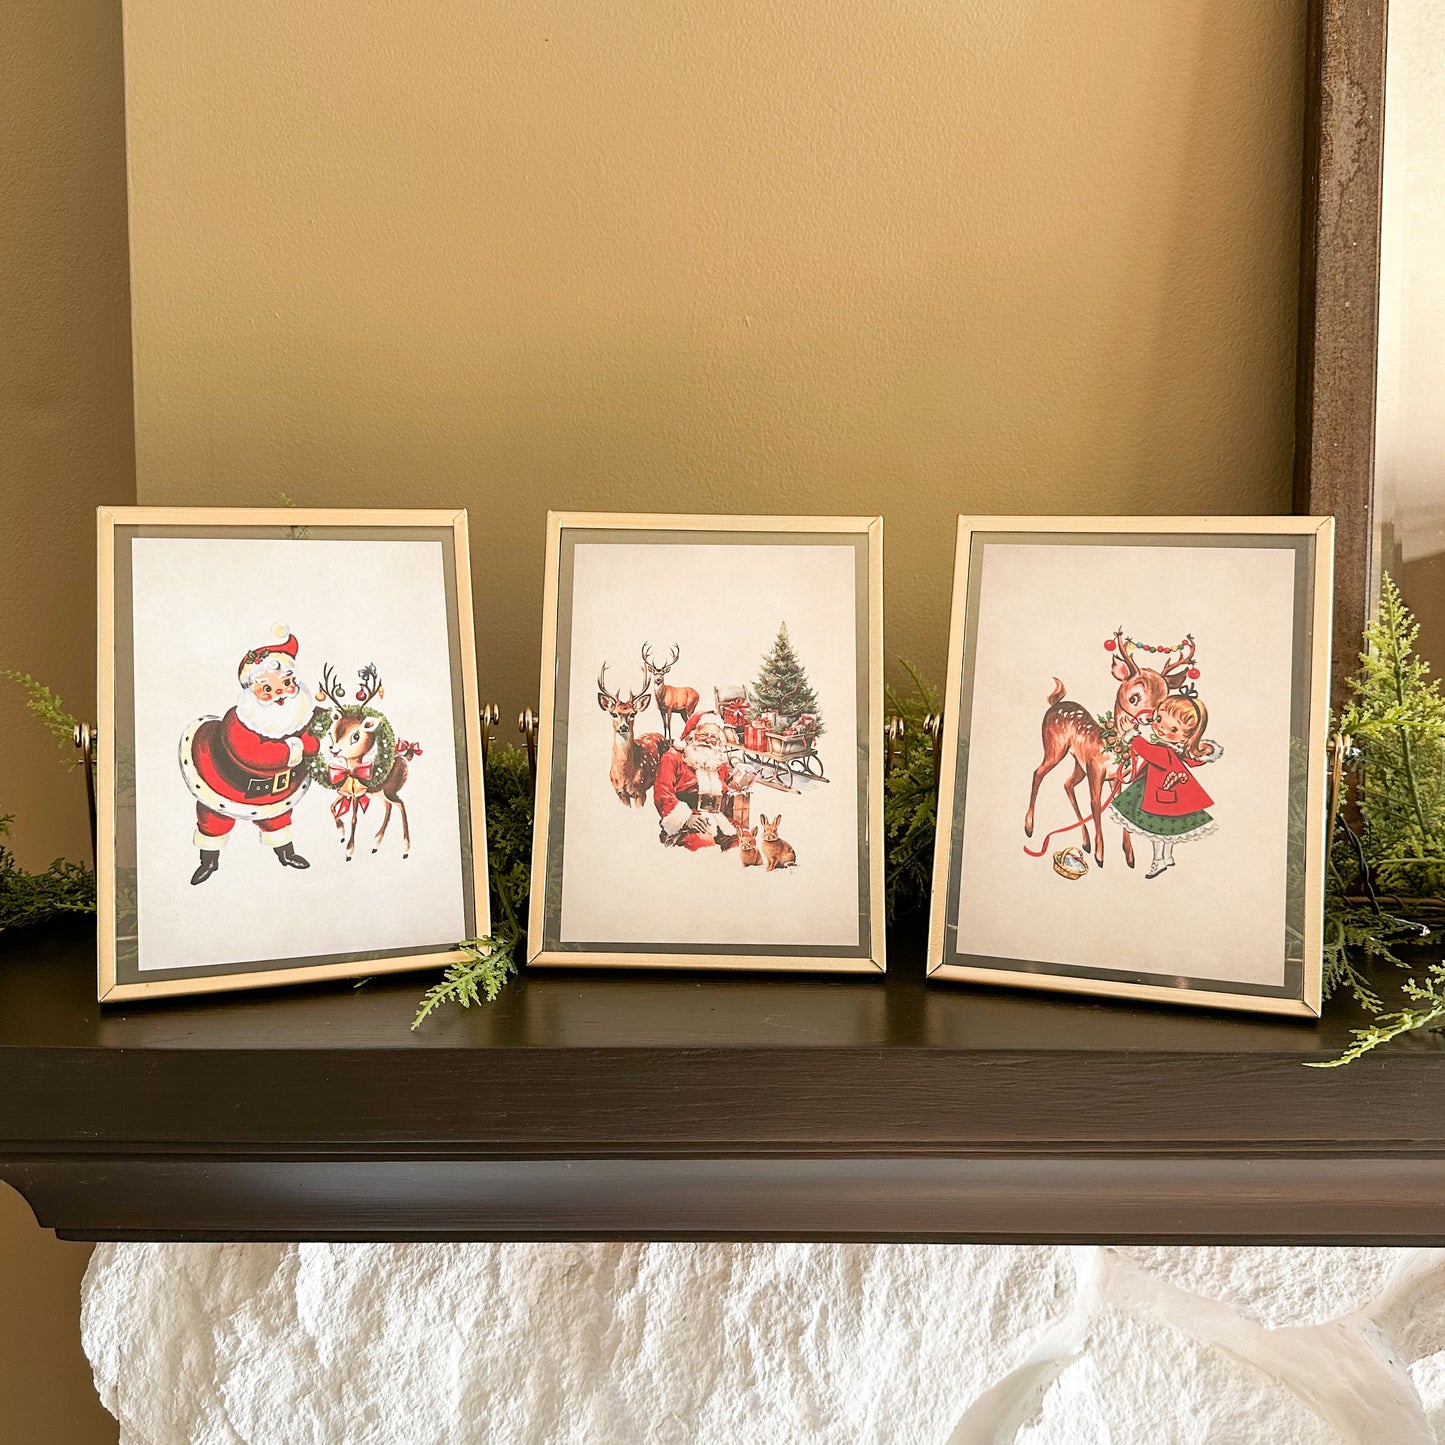 Gold Framed Print | Old Fashioned Santa with Sleigh and Deer